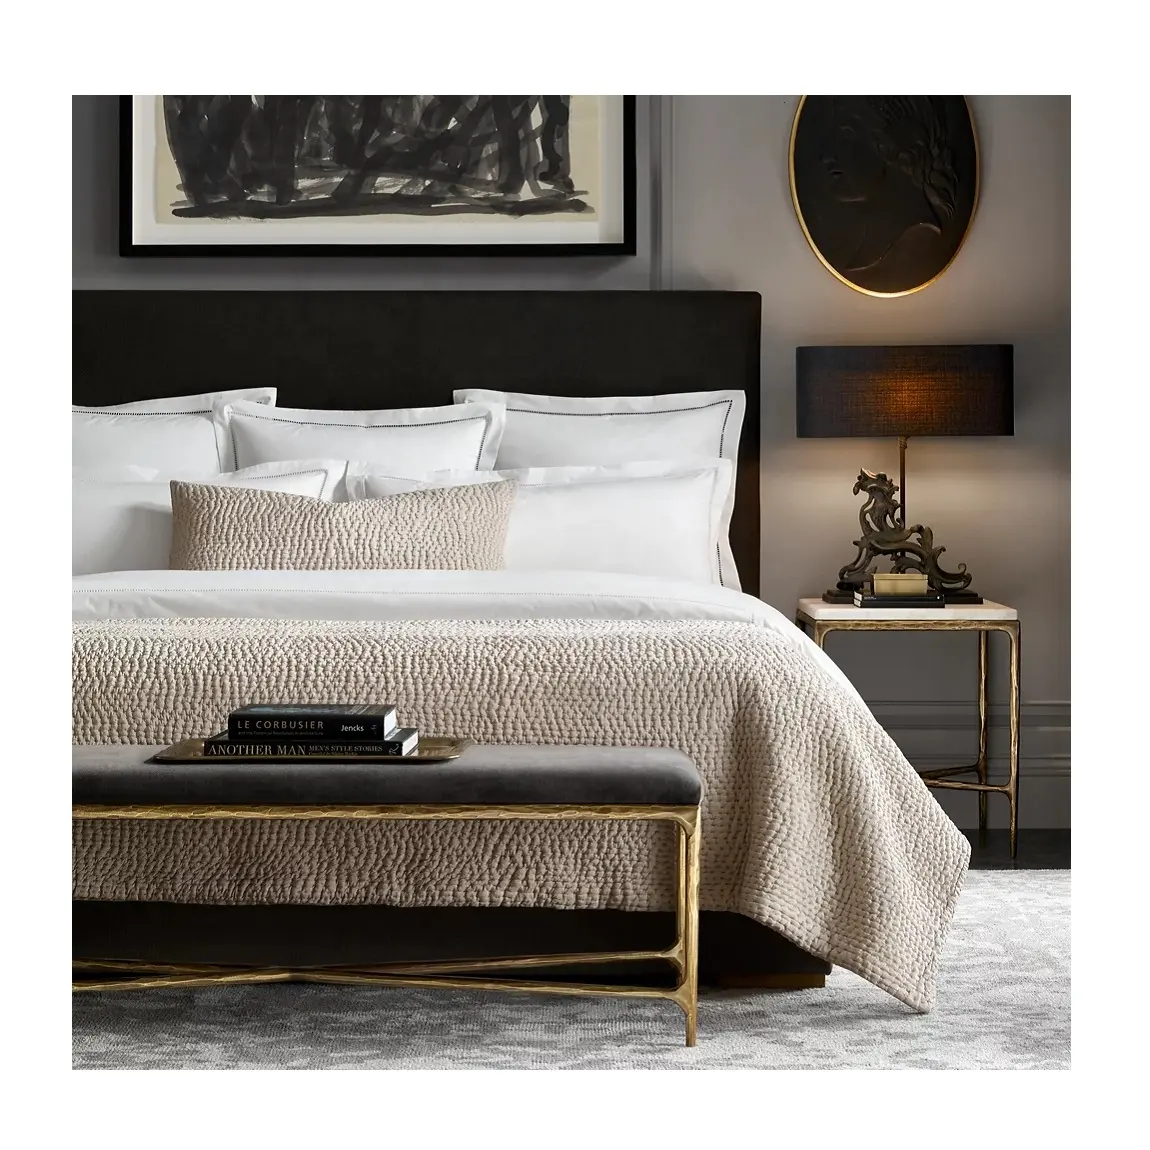 Modern luxury hand-forged metal base upholstery thaddeus brass end of bed fabric bench for home bedroom furniture